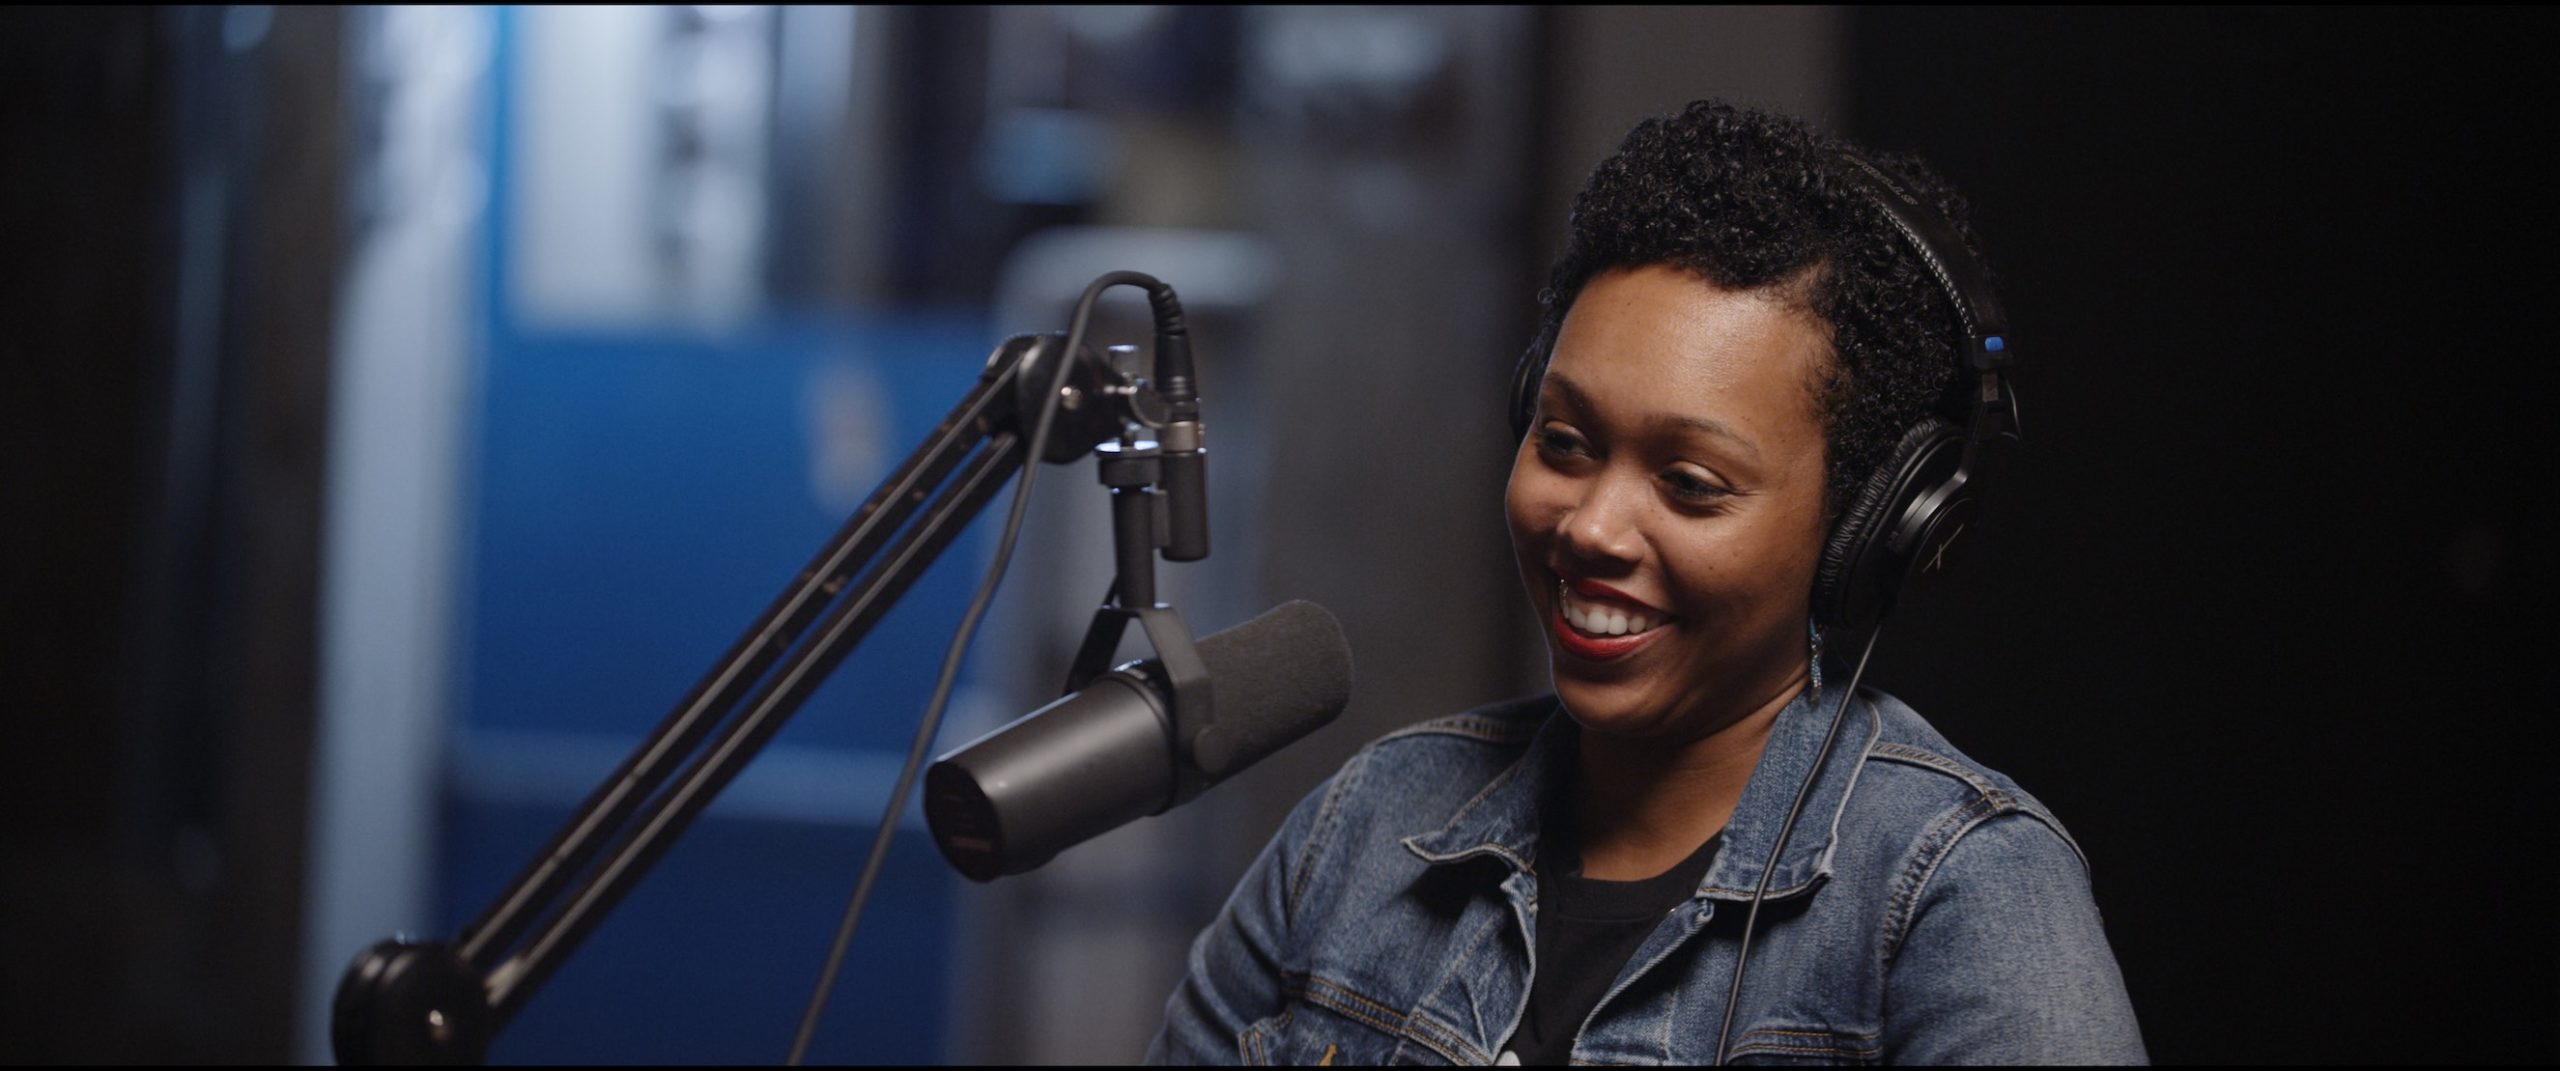 Season 2 of Uncreative Radio with Tiffany Lanier with her wearing headphones and smiling by a microphone